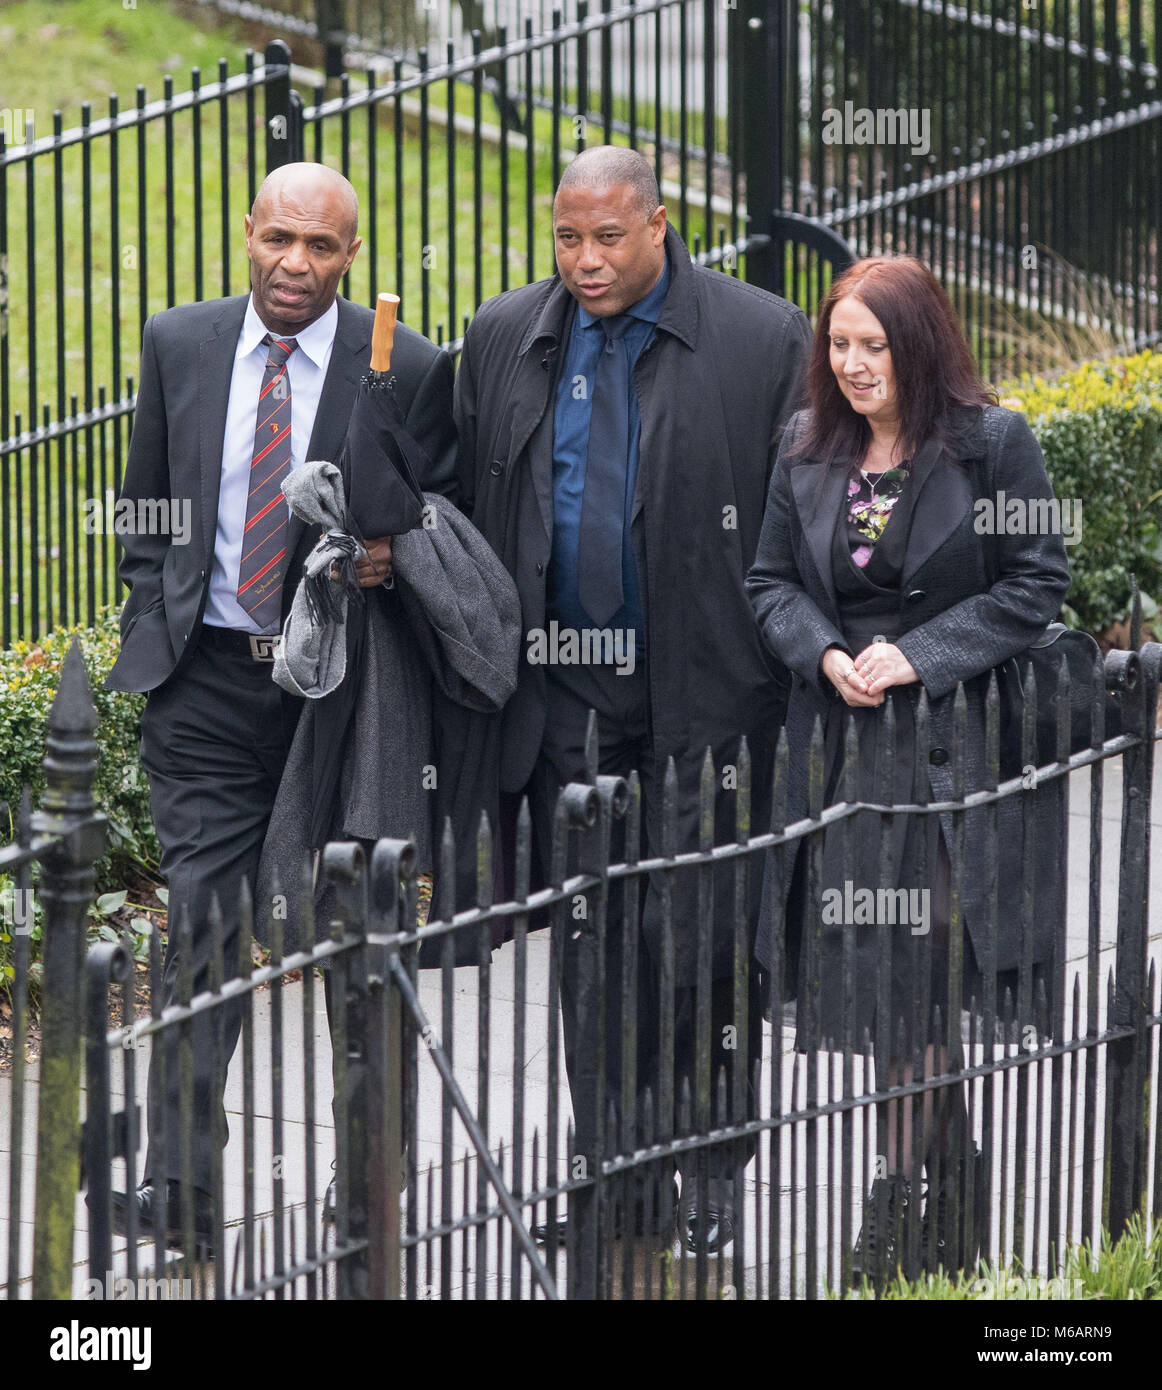 Watford former players Luther Blissett (left) & John Barnes arrive at the Funeral of Graham Taylor  at St Mary's Church, Church Street, England on 1 F Stock Photo